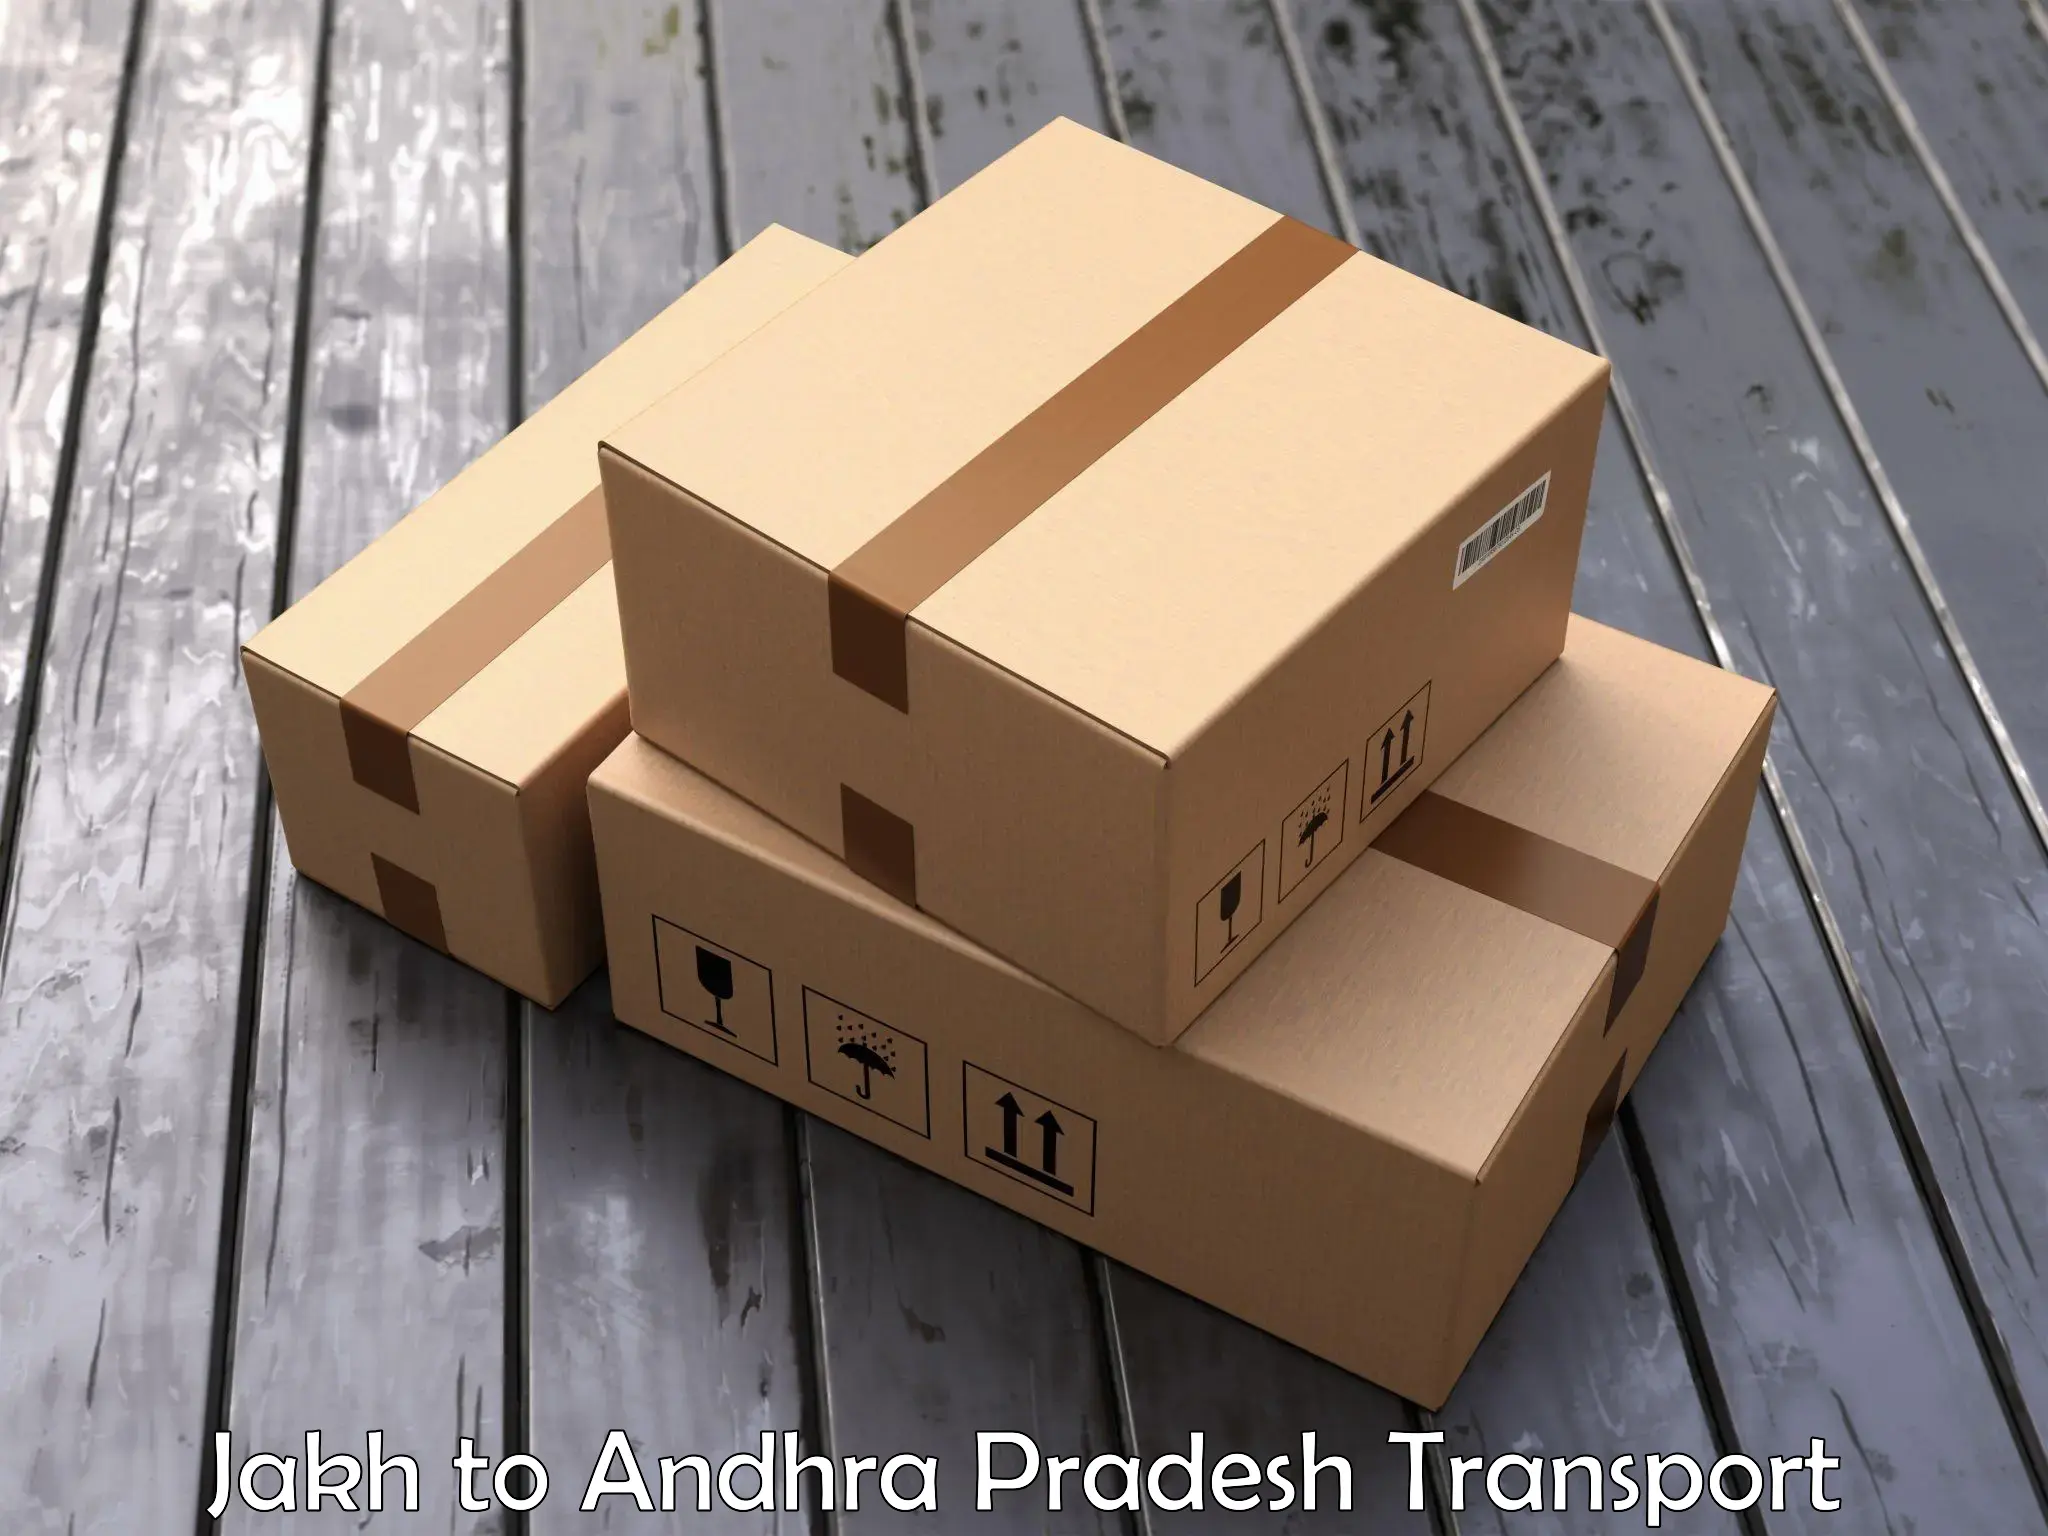 Shipping services Jakh to Andhra Pradesh